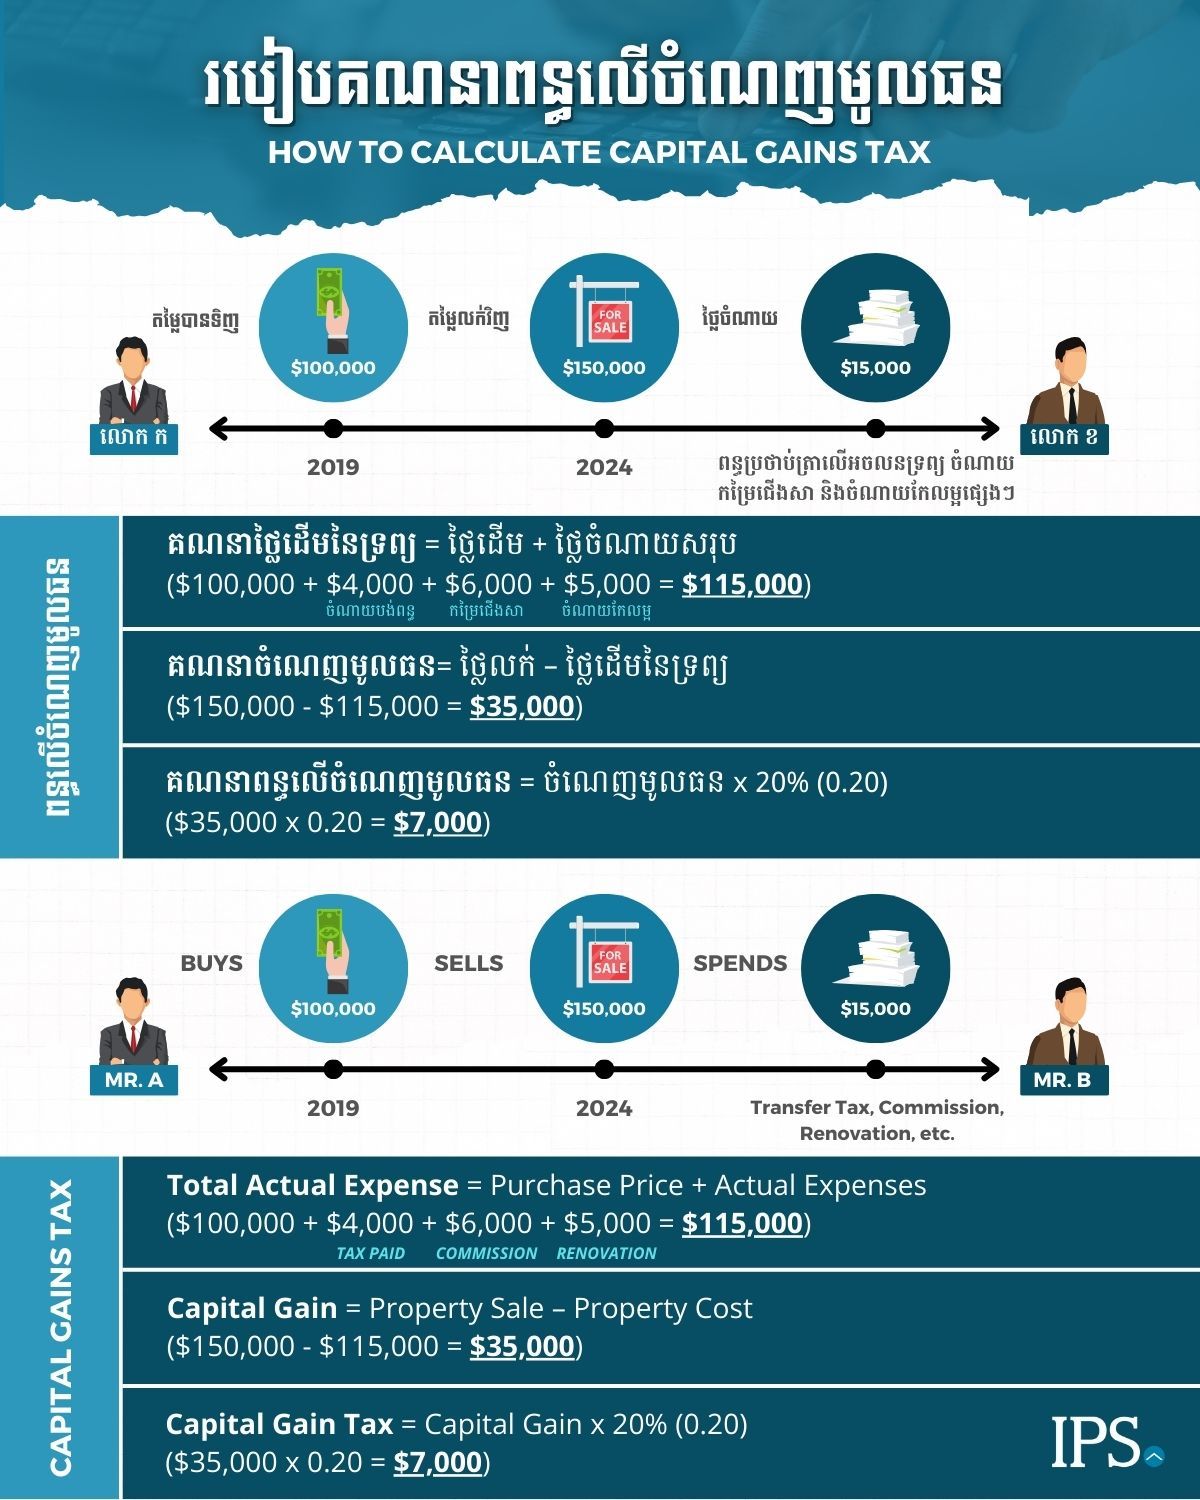 Sample-Computation-on-how-to-calculate-capital-tax-gains-in-Cambodia